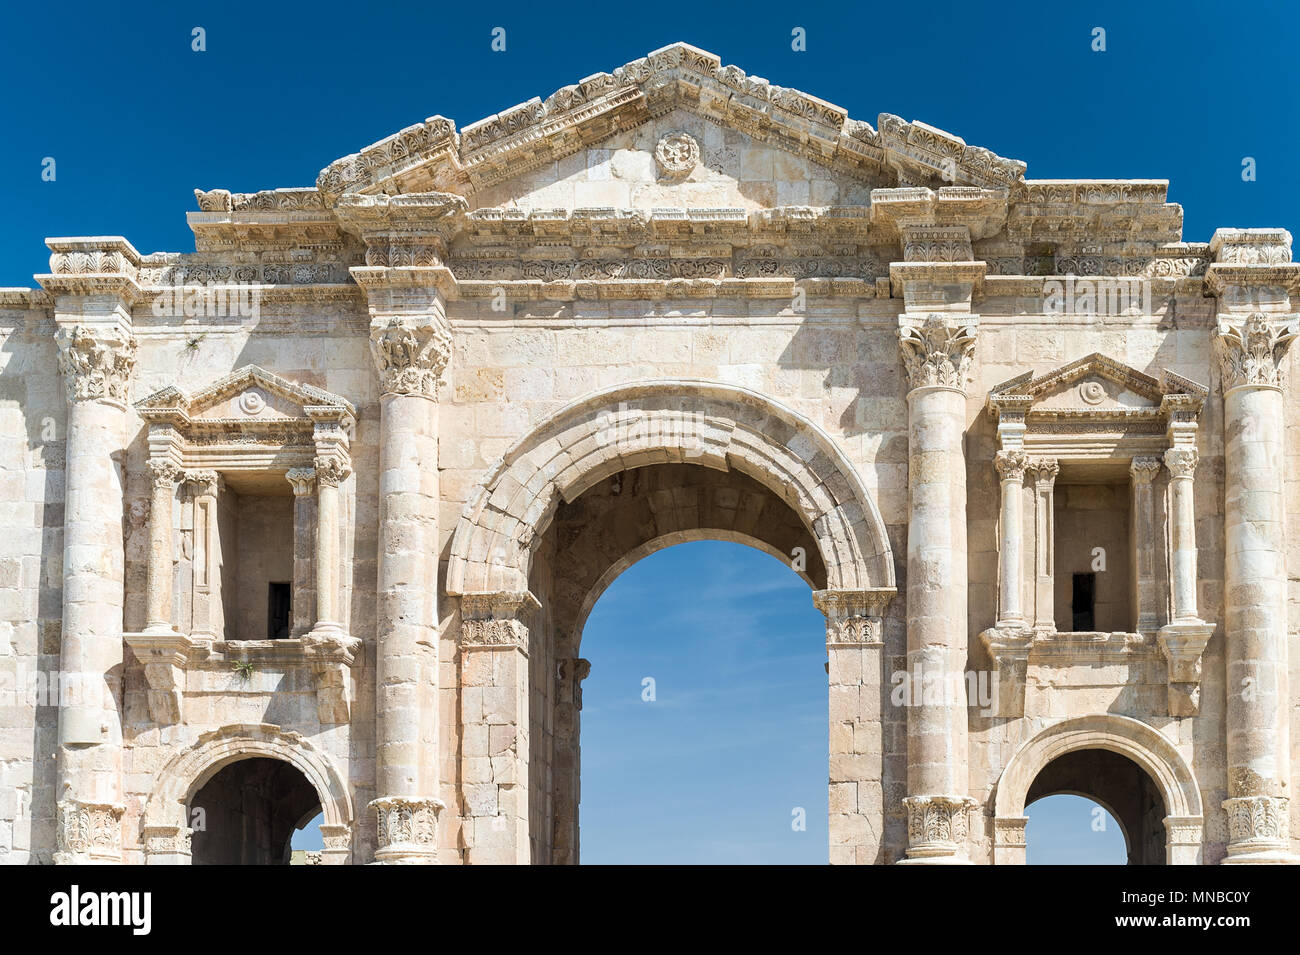 Jerash is the site of the ruins of the Greco-Roman city of Gerasa, also referred to as Antioch on the Golden River. Stock Photo